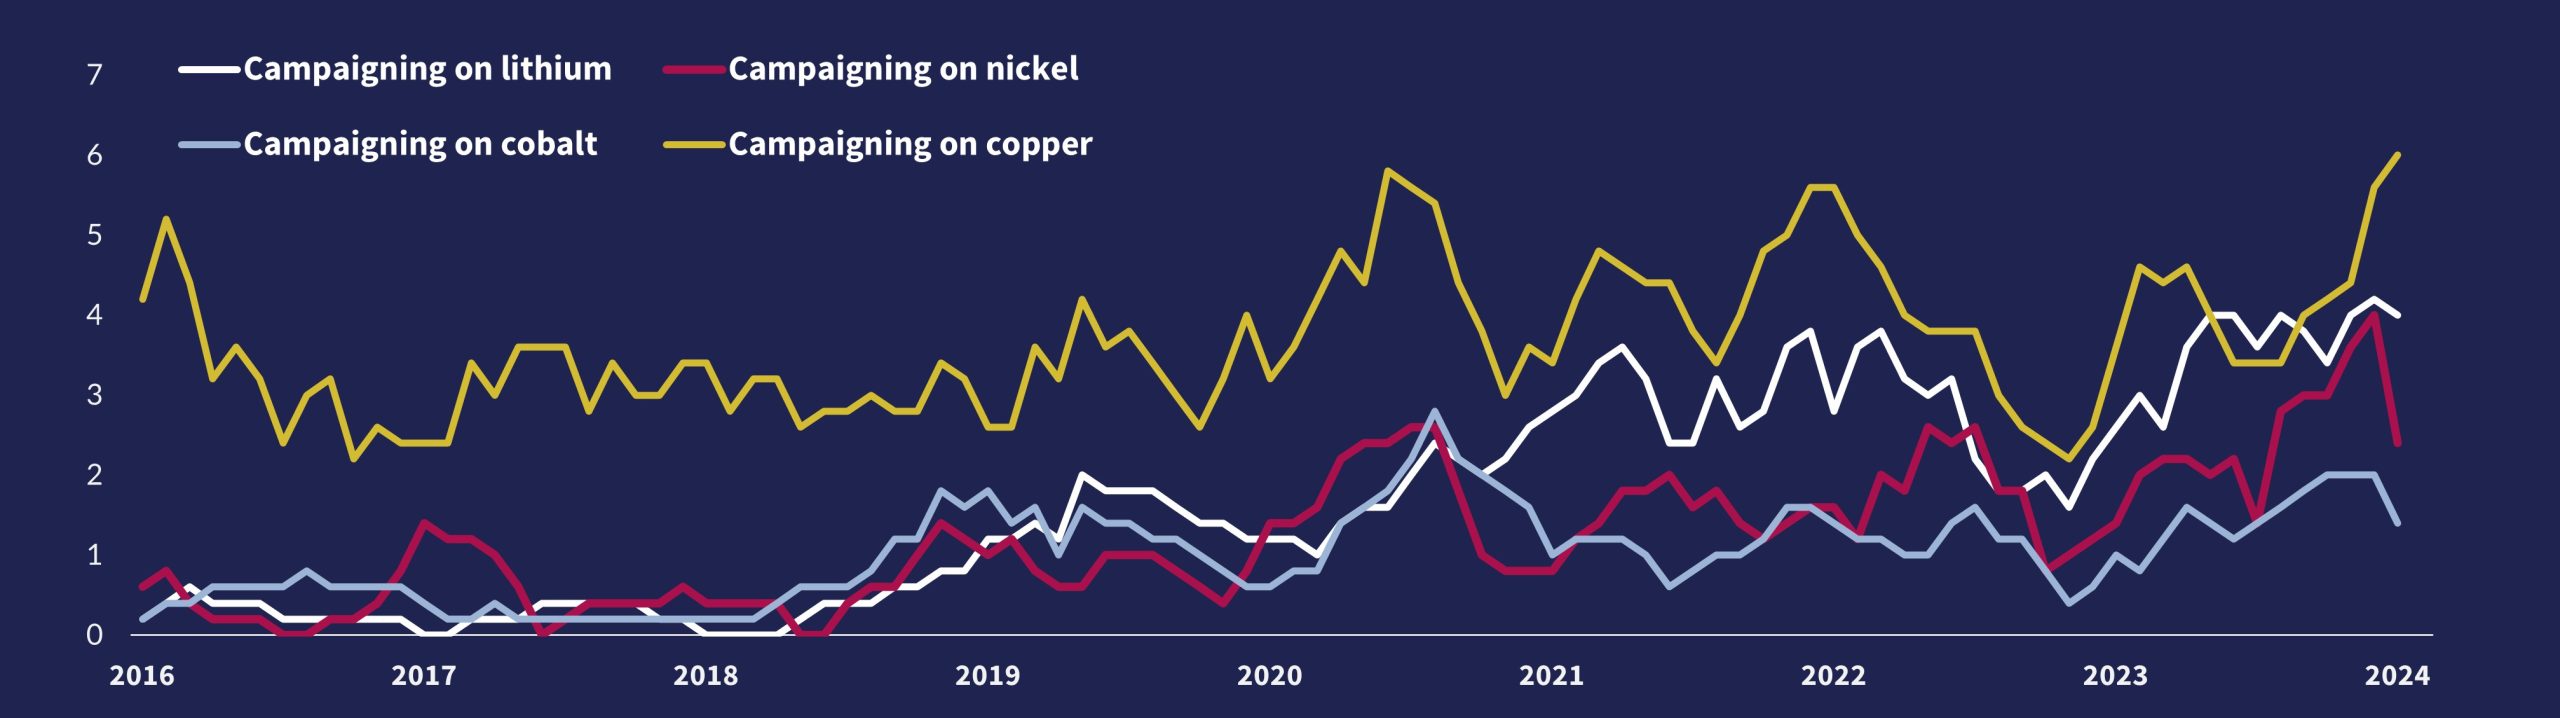 Graph showing campaigning patterns targeted at the mining sector on transition metals like copper, lithium, cobalt and nickel since 2016